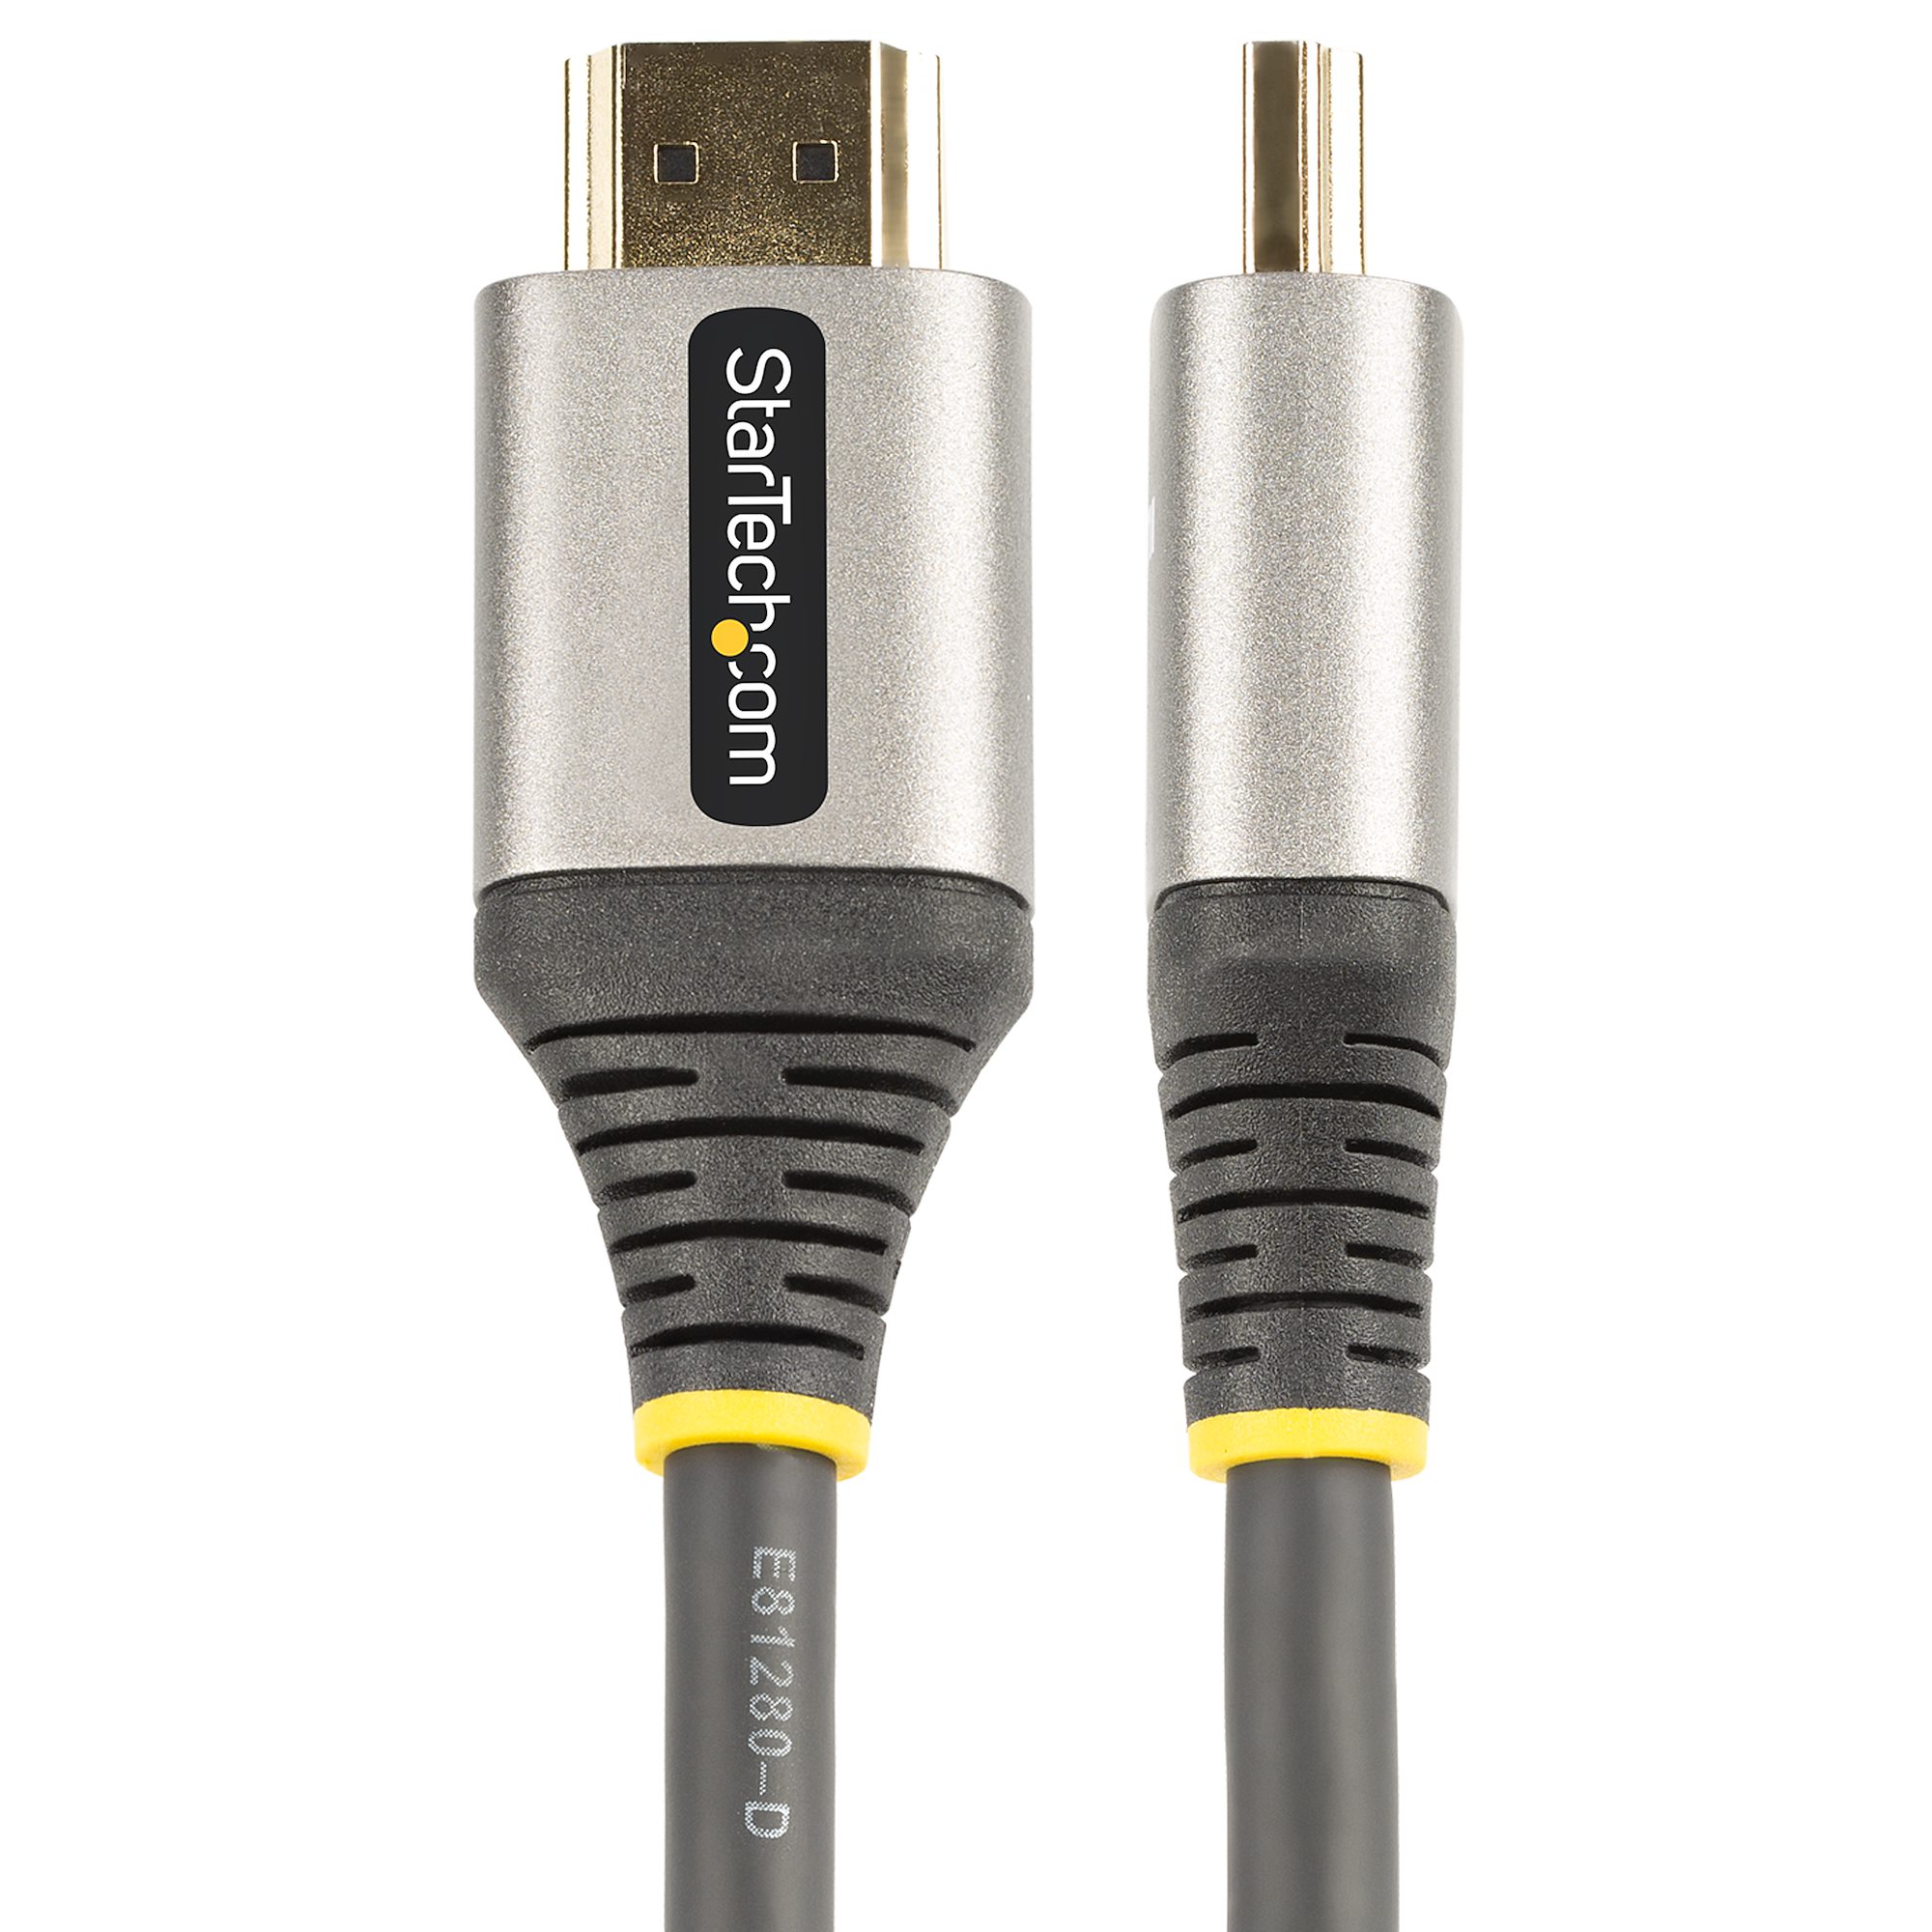 StarTech.com 3m High Speed HDMI Cable - Ultra HD 4k x 2k HDMI Cable - HDMI  to HDMI M/M (HDMM3M)